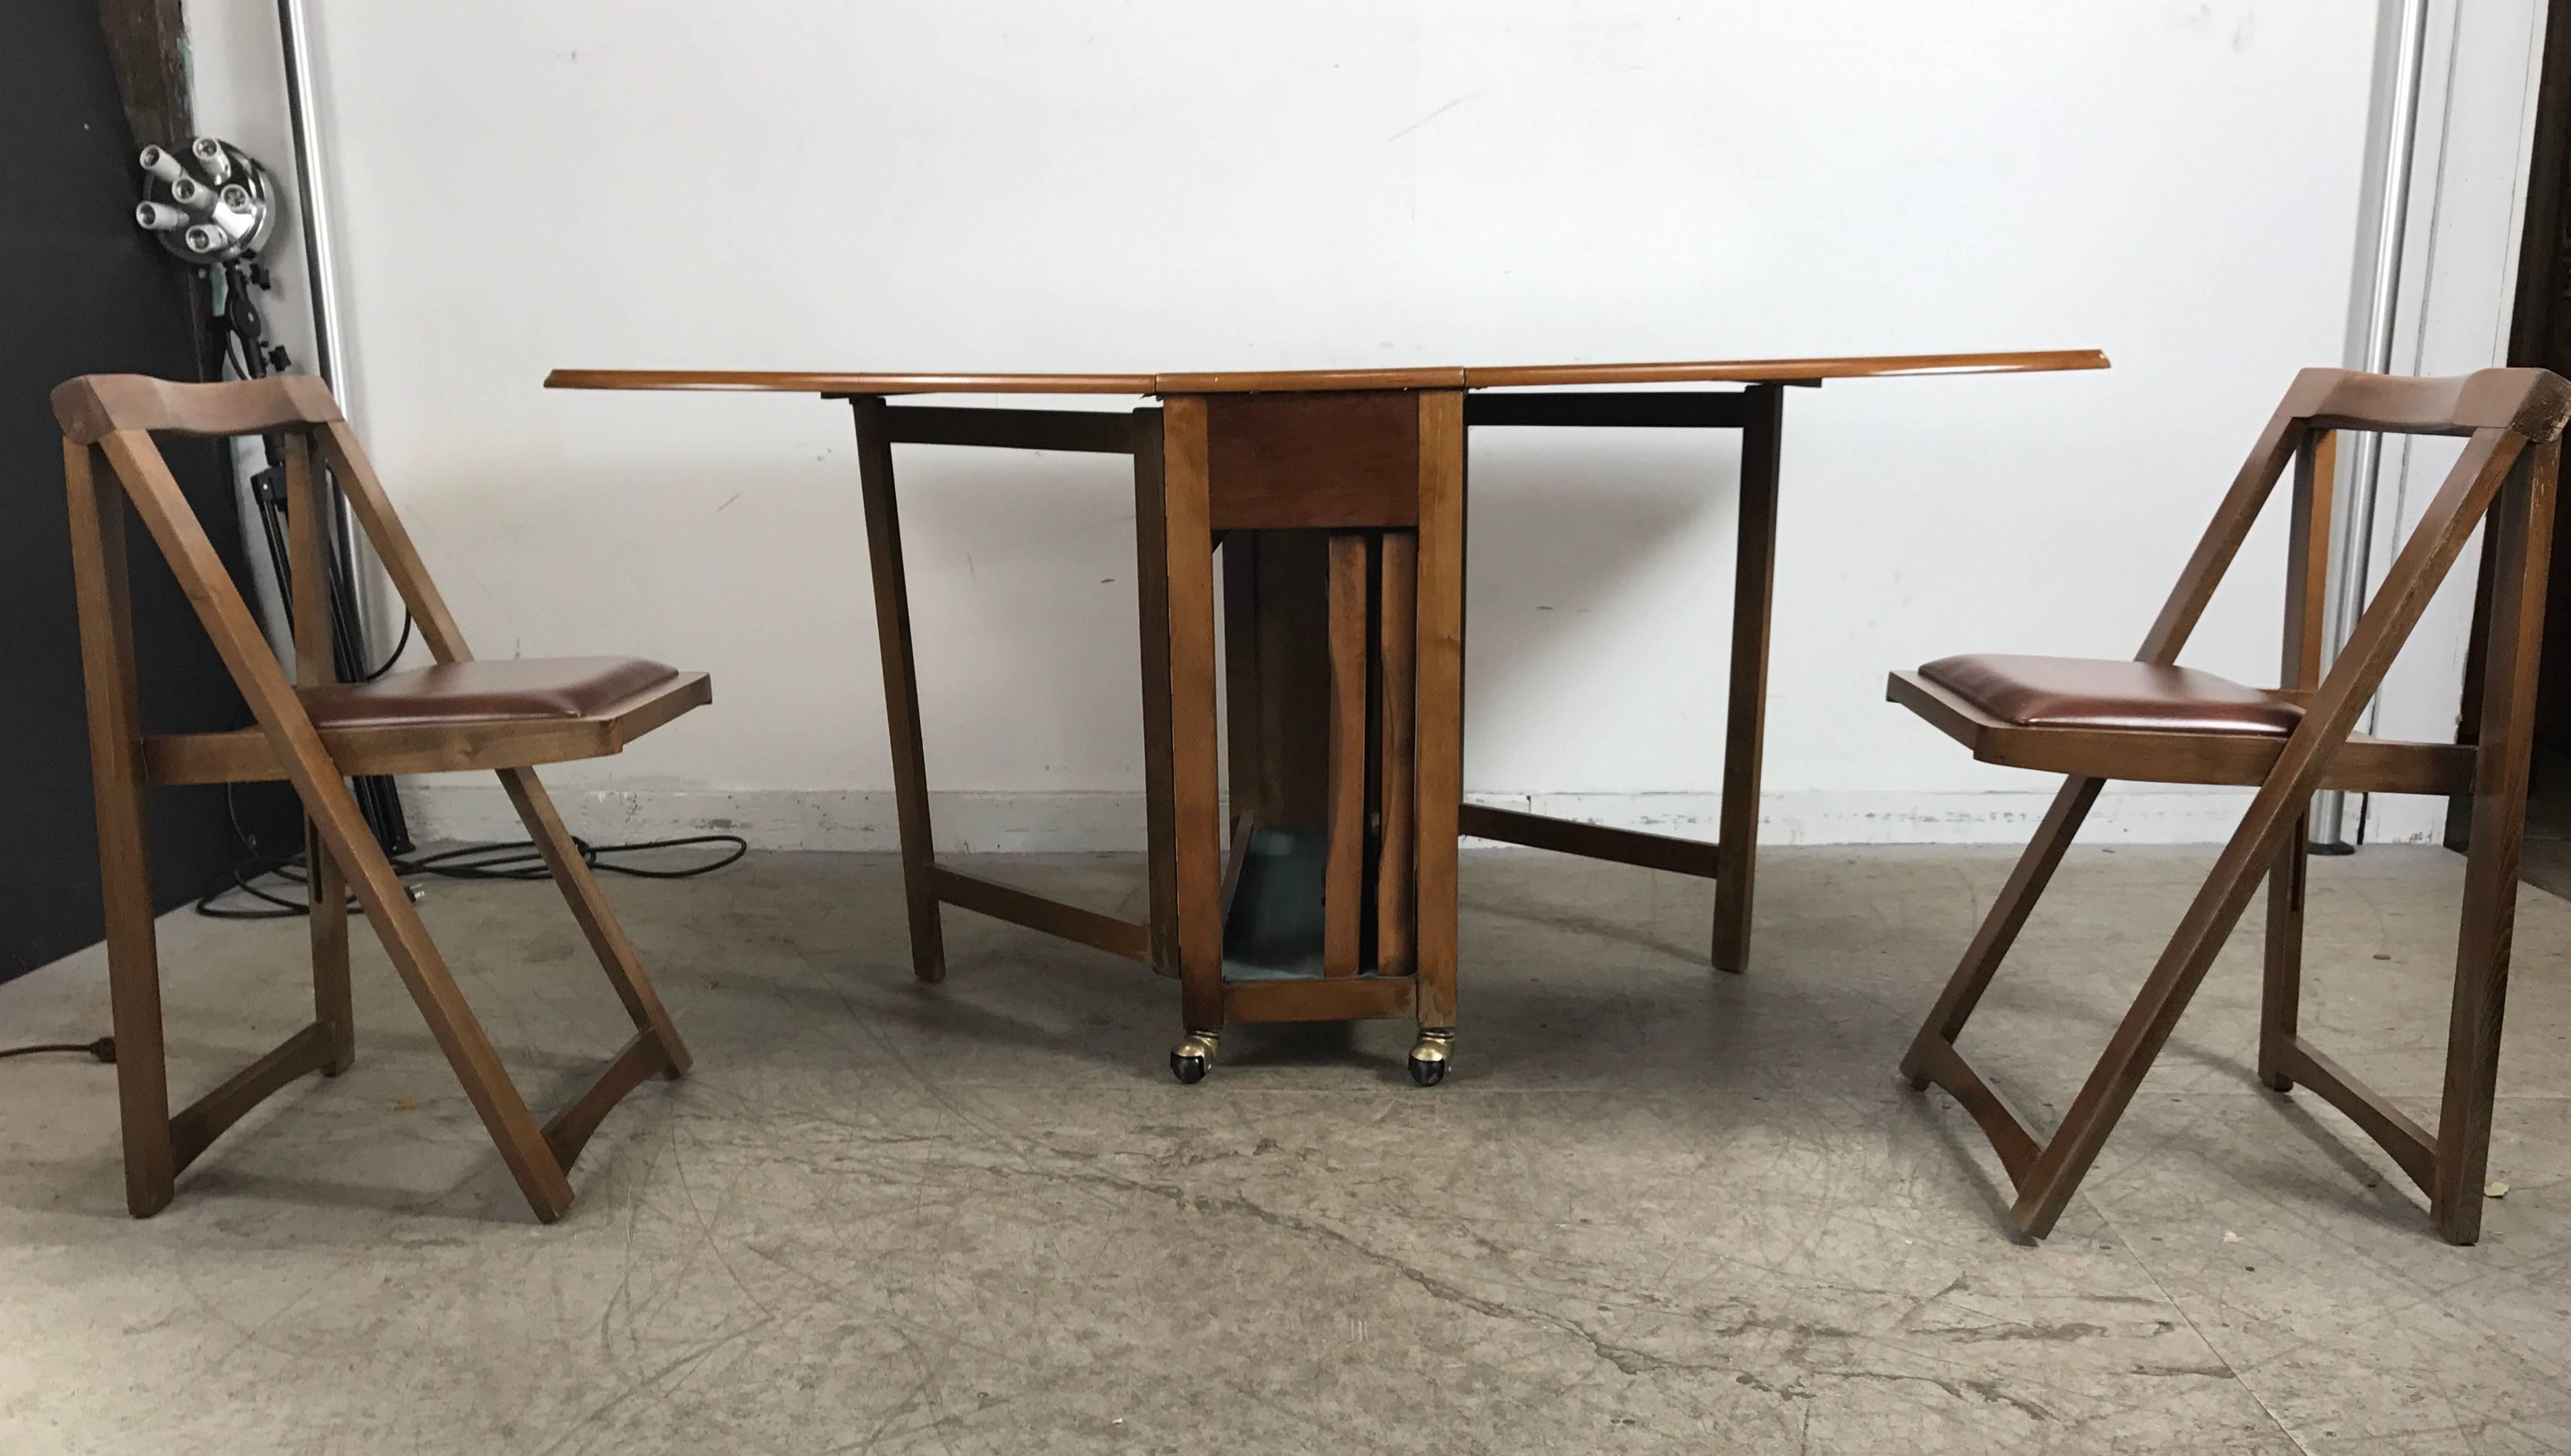 Modernist suitcase dining table ,fold down, compact self stored chairs, amazing design, richly grained wood top. Table open measures 51 inches x 34 inches x 29.5 inches high when closed. Measures 34 inches x 14 inches x 29.5 inches high and neatly